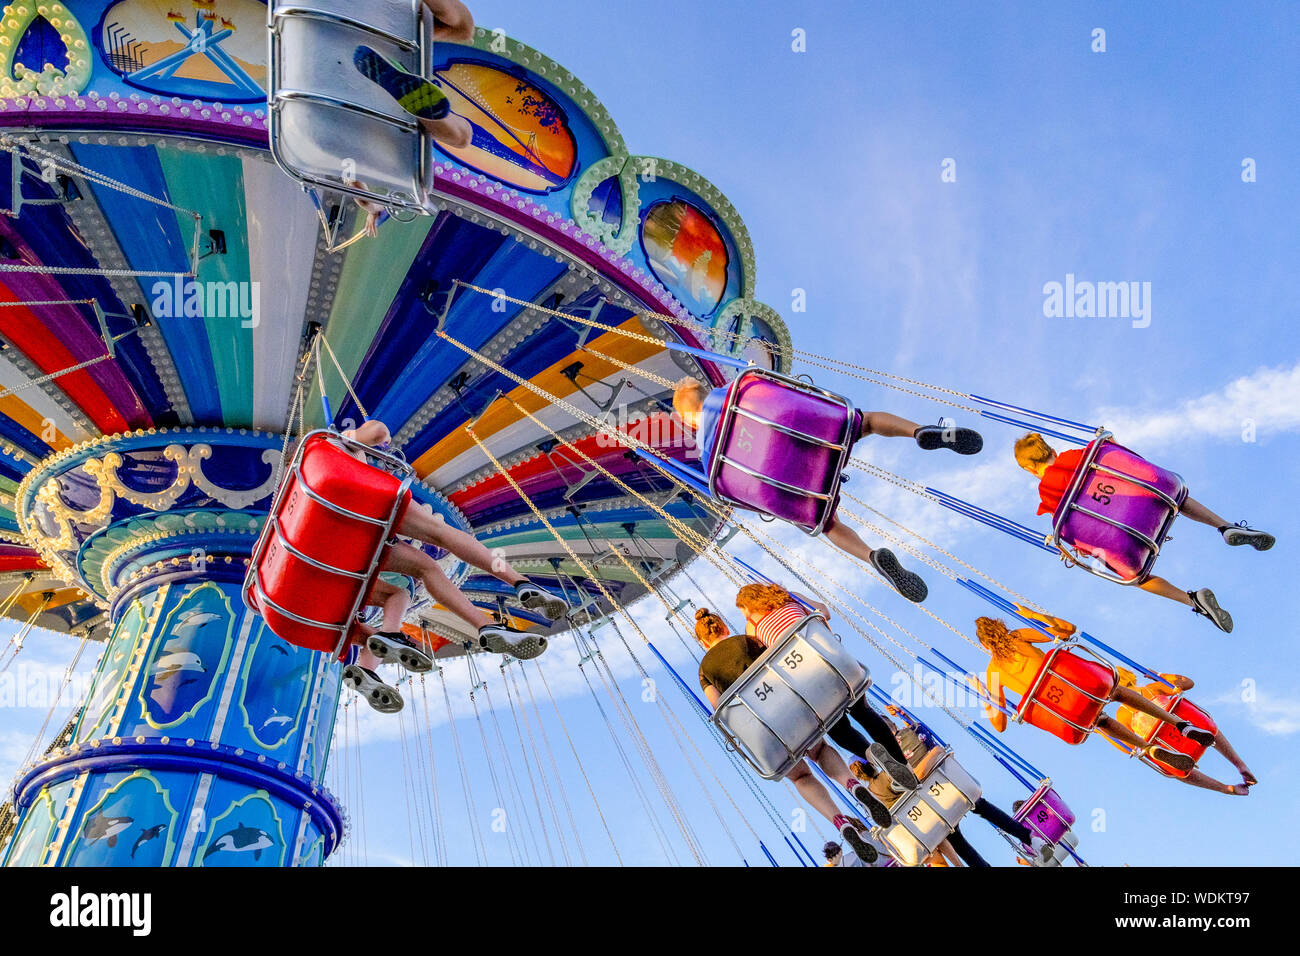 Sea to Sky Swinger, Playland, Hastings Park, Vancouver, British Columbia, Canada Foto Stock